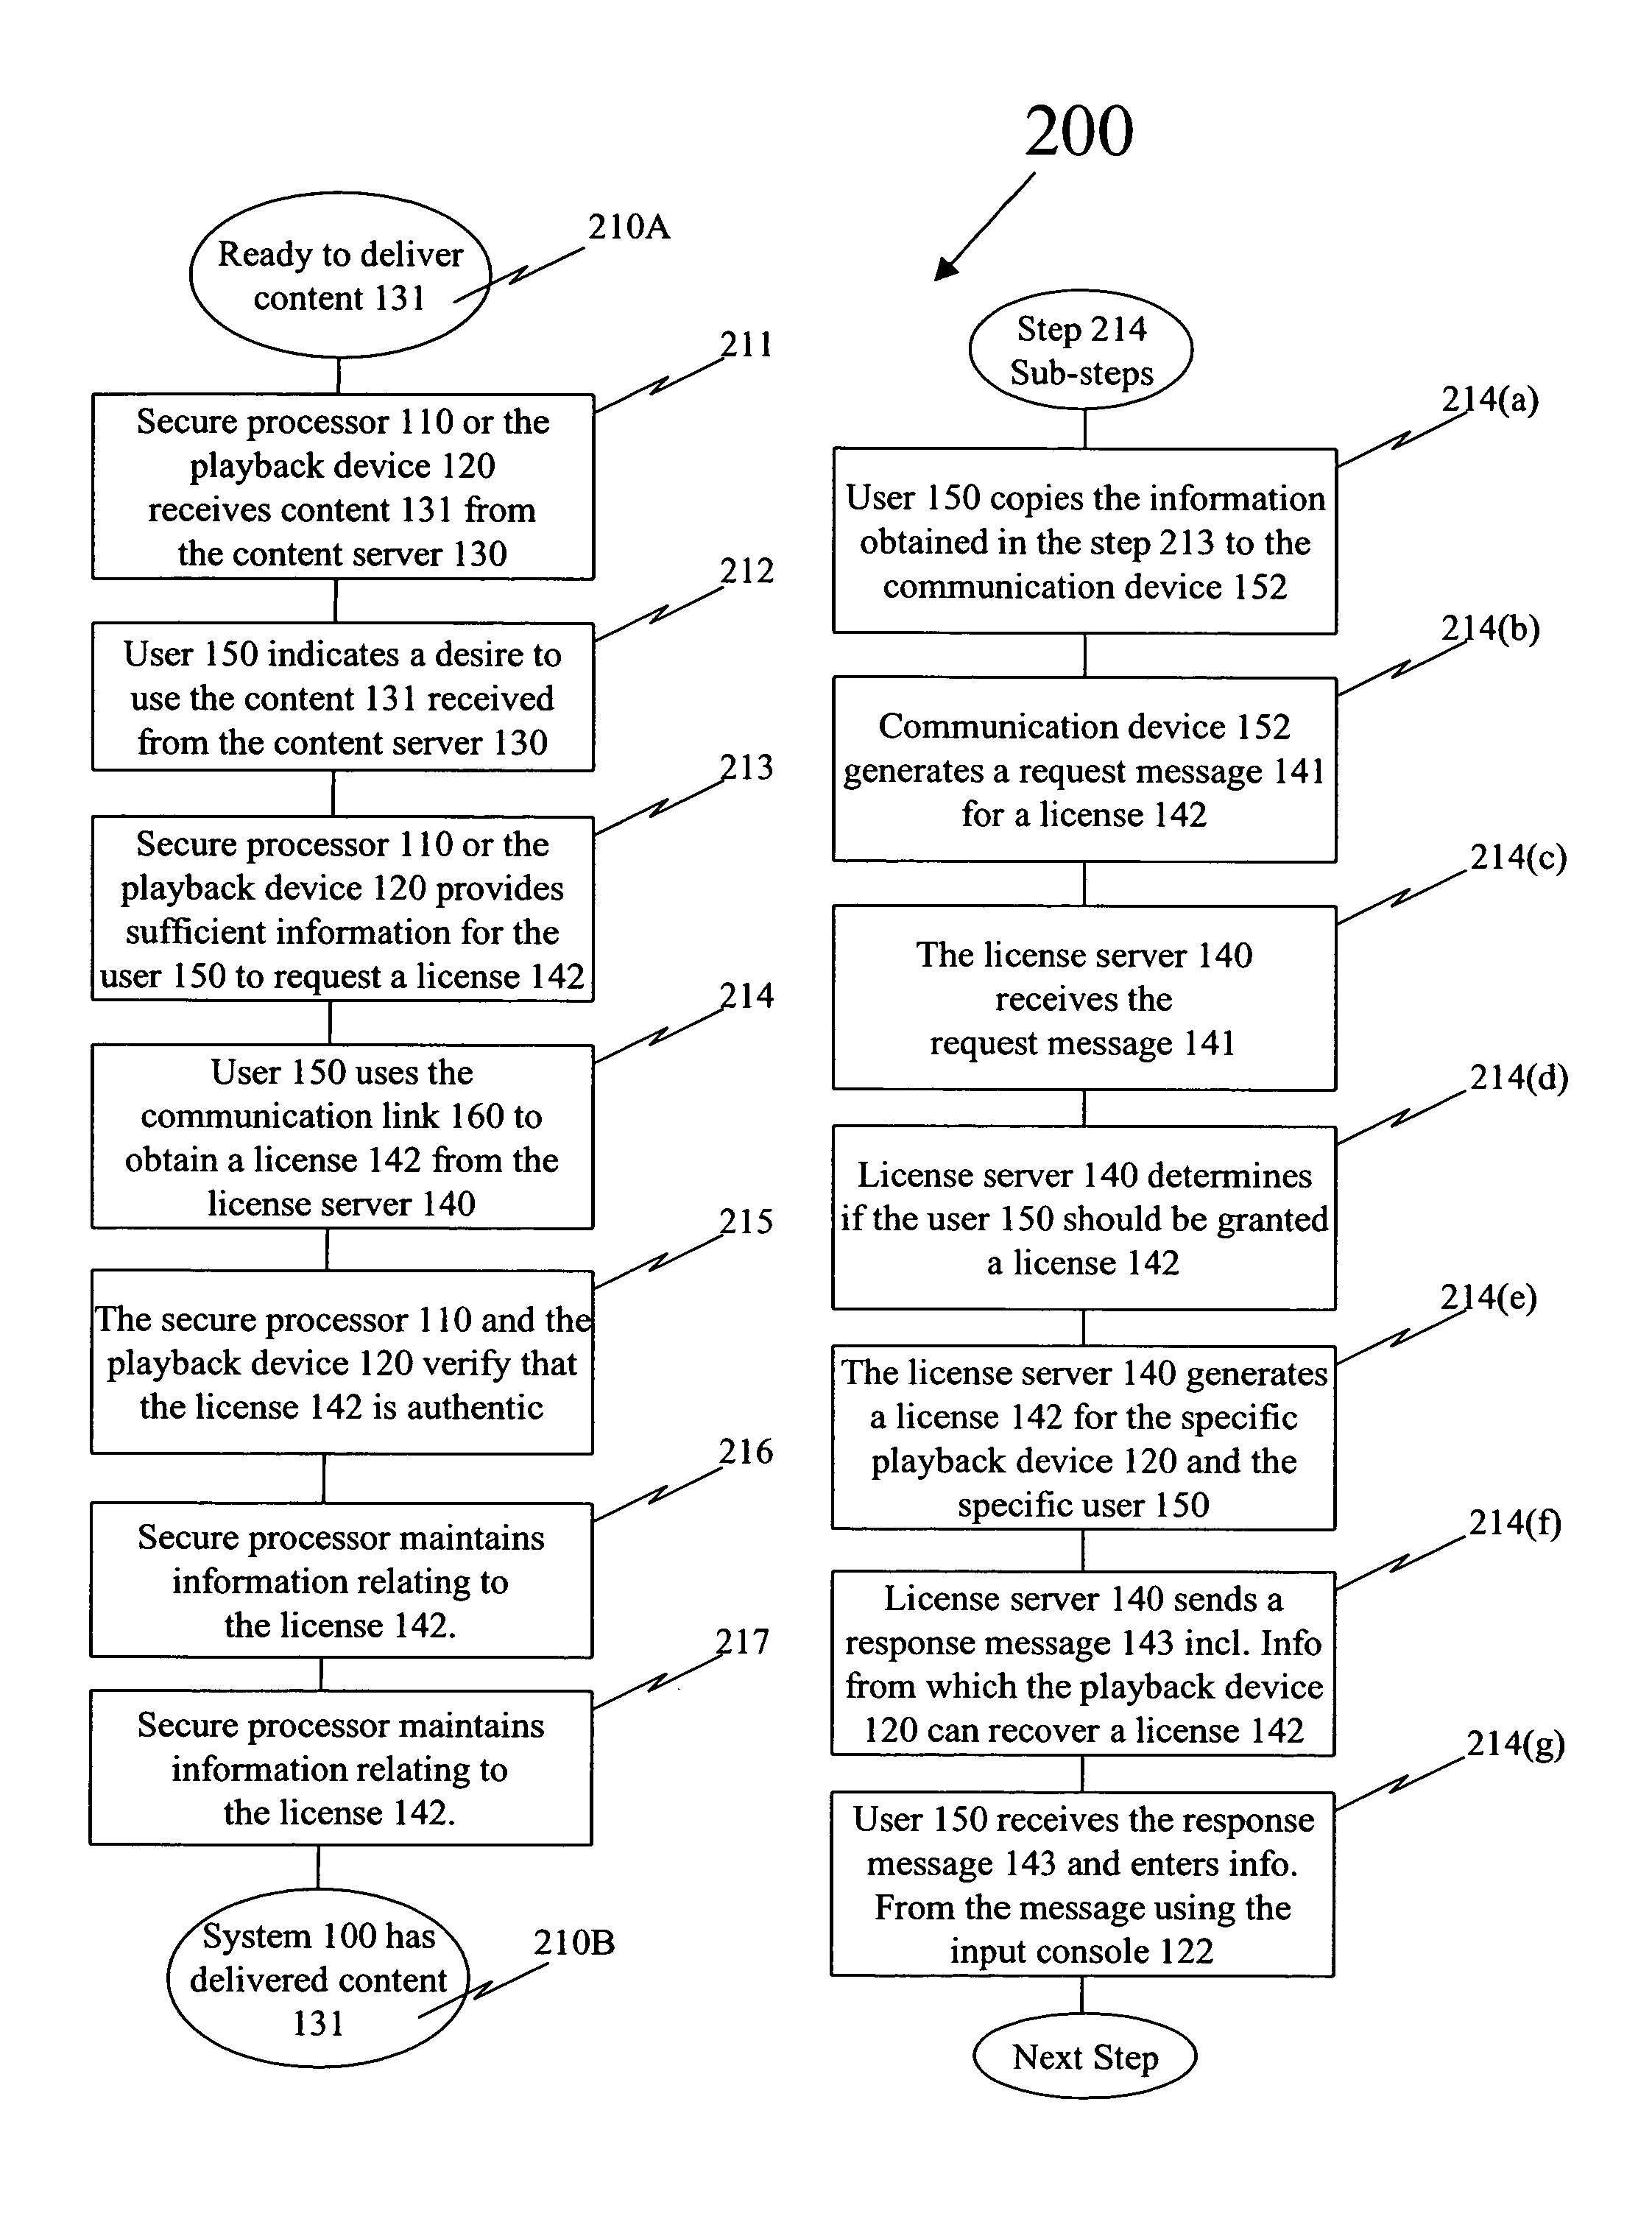 Delivery of license information using a short messaging system protocol in a closed content distribution system